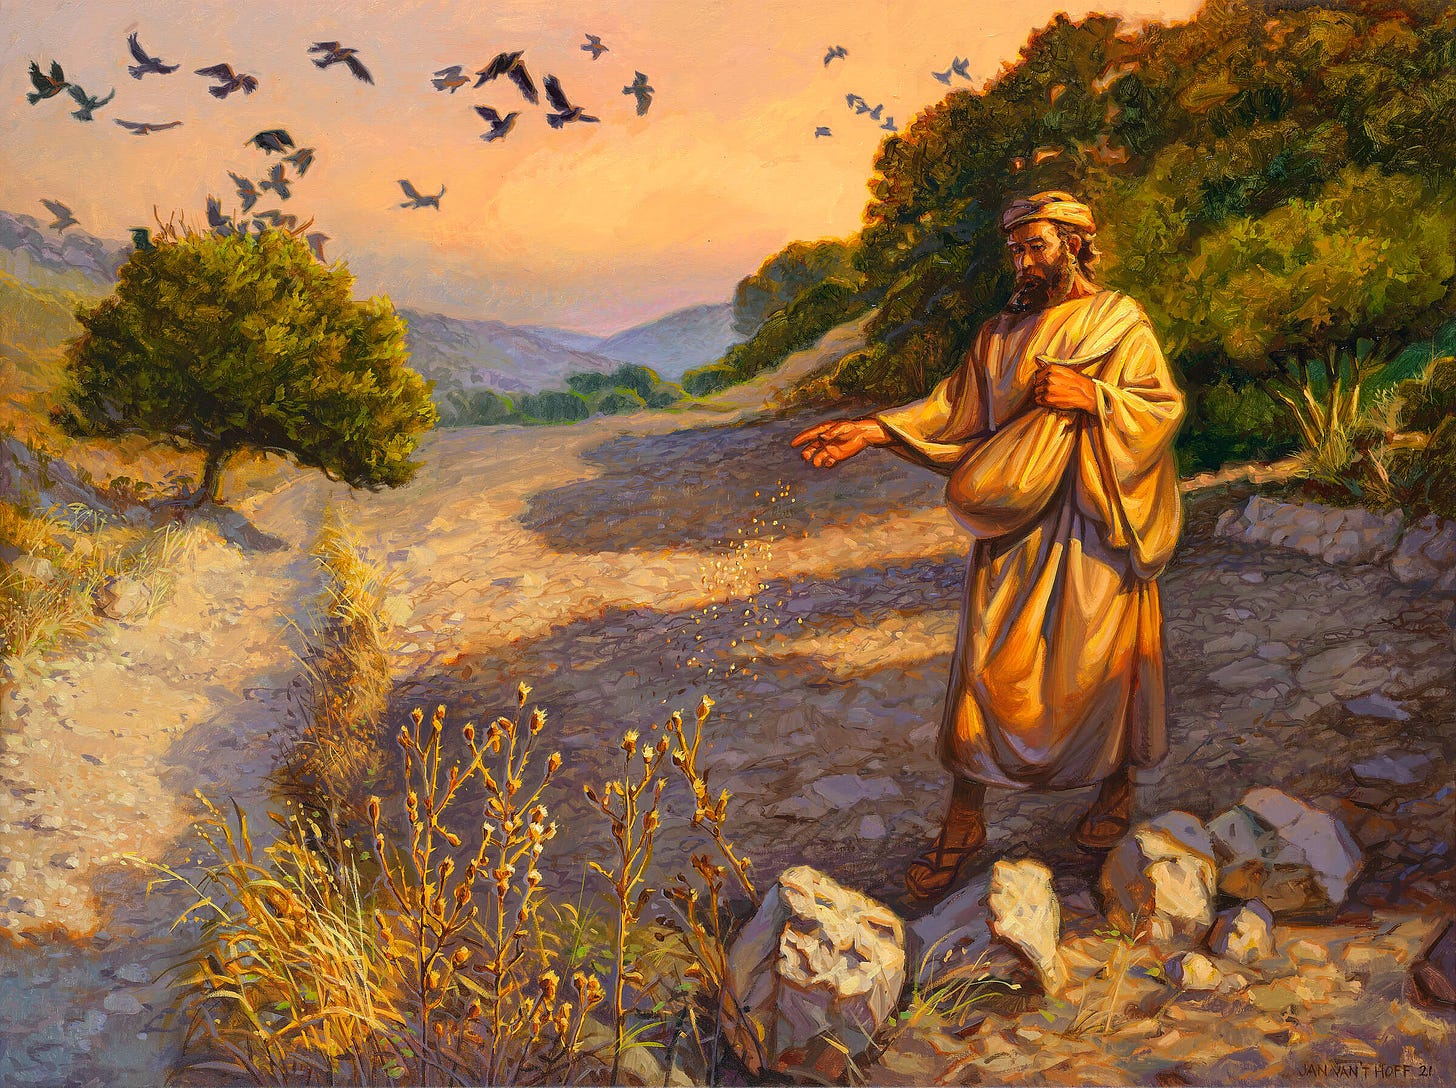 The Parable of the Sower - Gospelimages